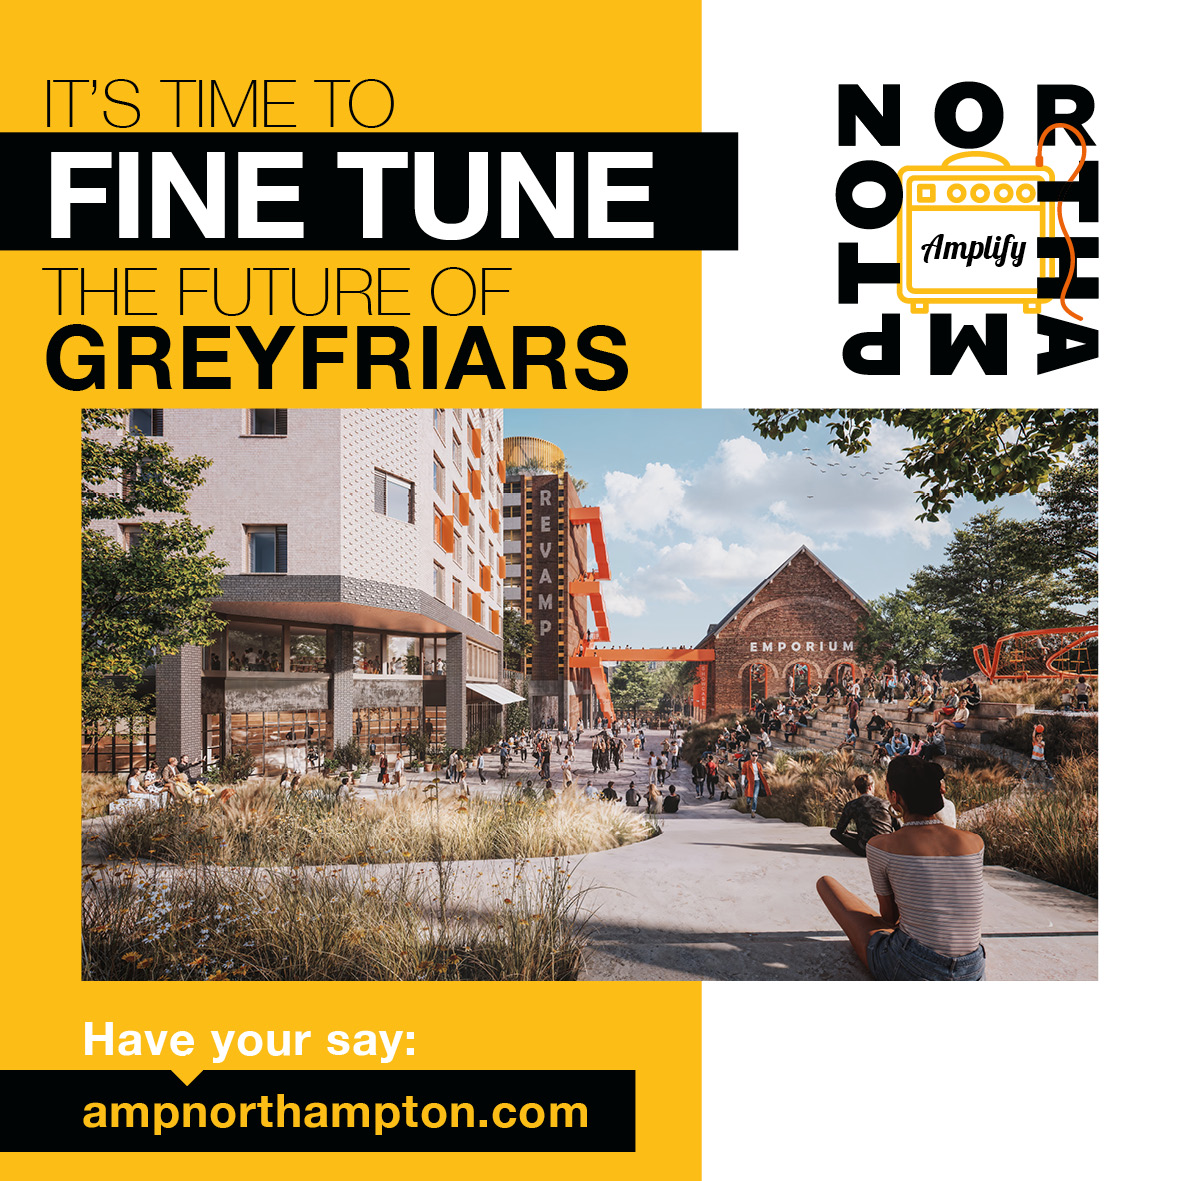 Thank you to those who shared your views in the first phase of the consultation to redevelop the Greyfriars area in #Northampton (Dec 23- Jan 24). We're now launching the second phase based on the feedback received in the initial engagement. 👉 Visit ampnorthampton.com